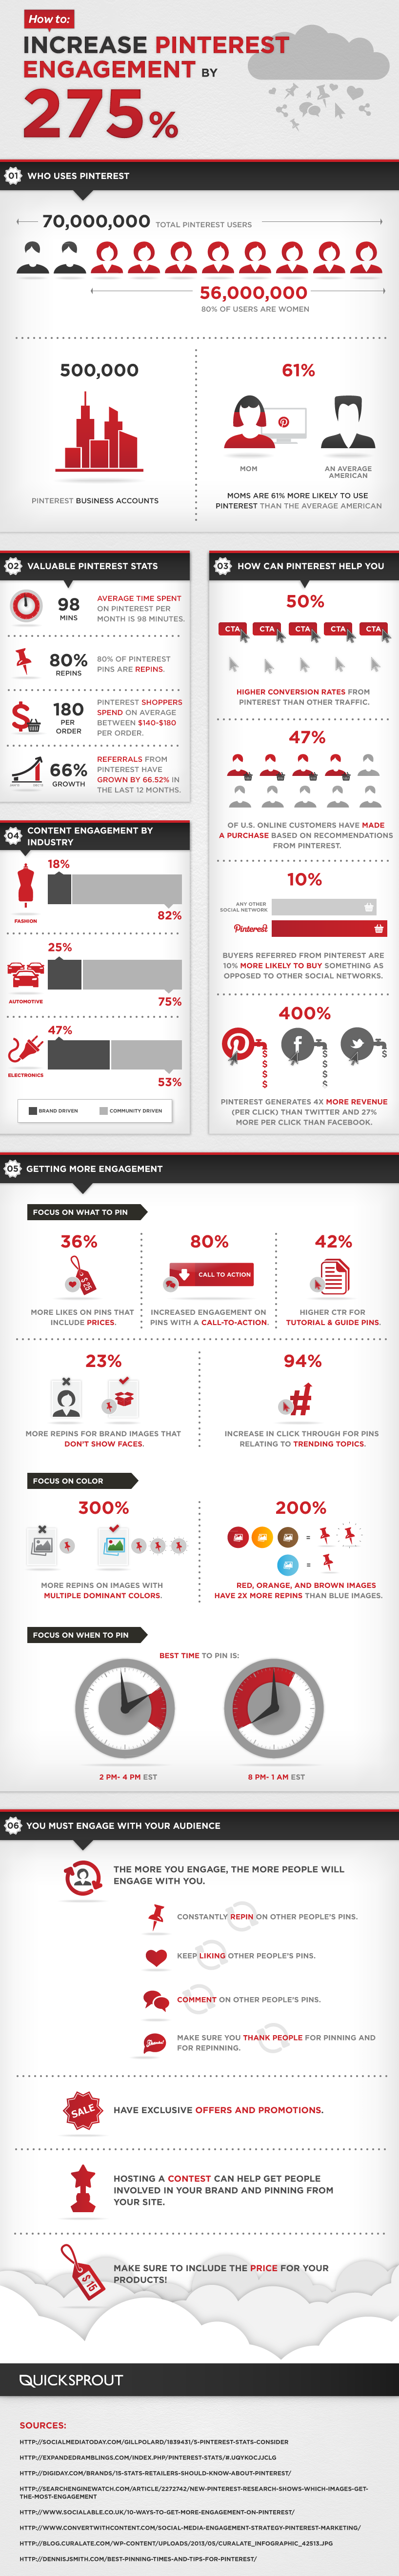 How to Increase Your Pinterest Engagement by 275%